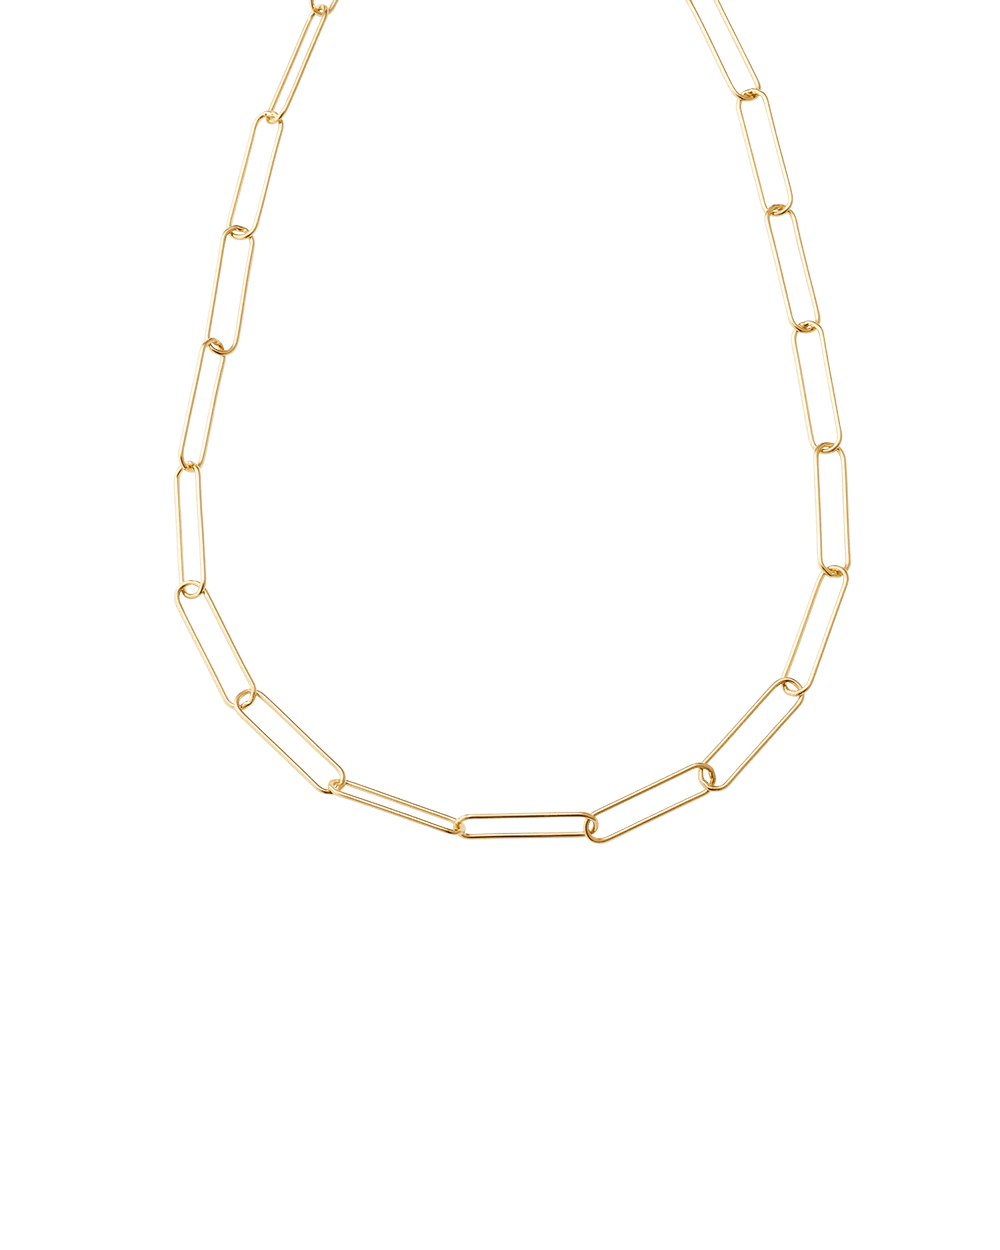 kirstin-ash-necklaces-yellow-gold-roam-chain-necklace-42766125170939